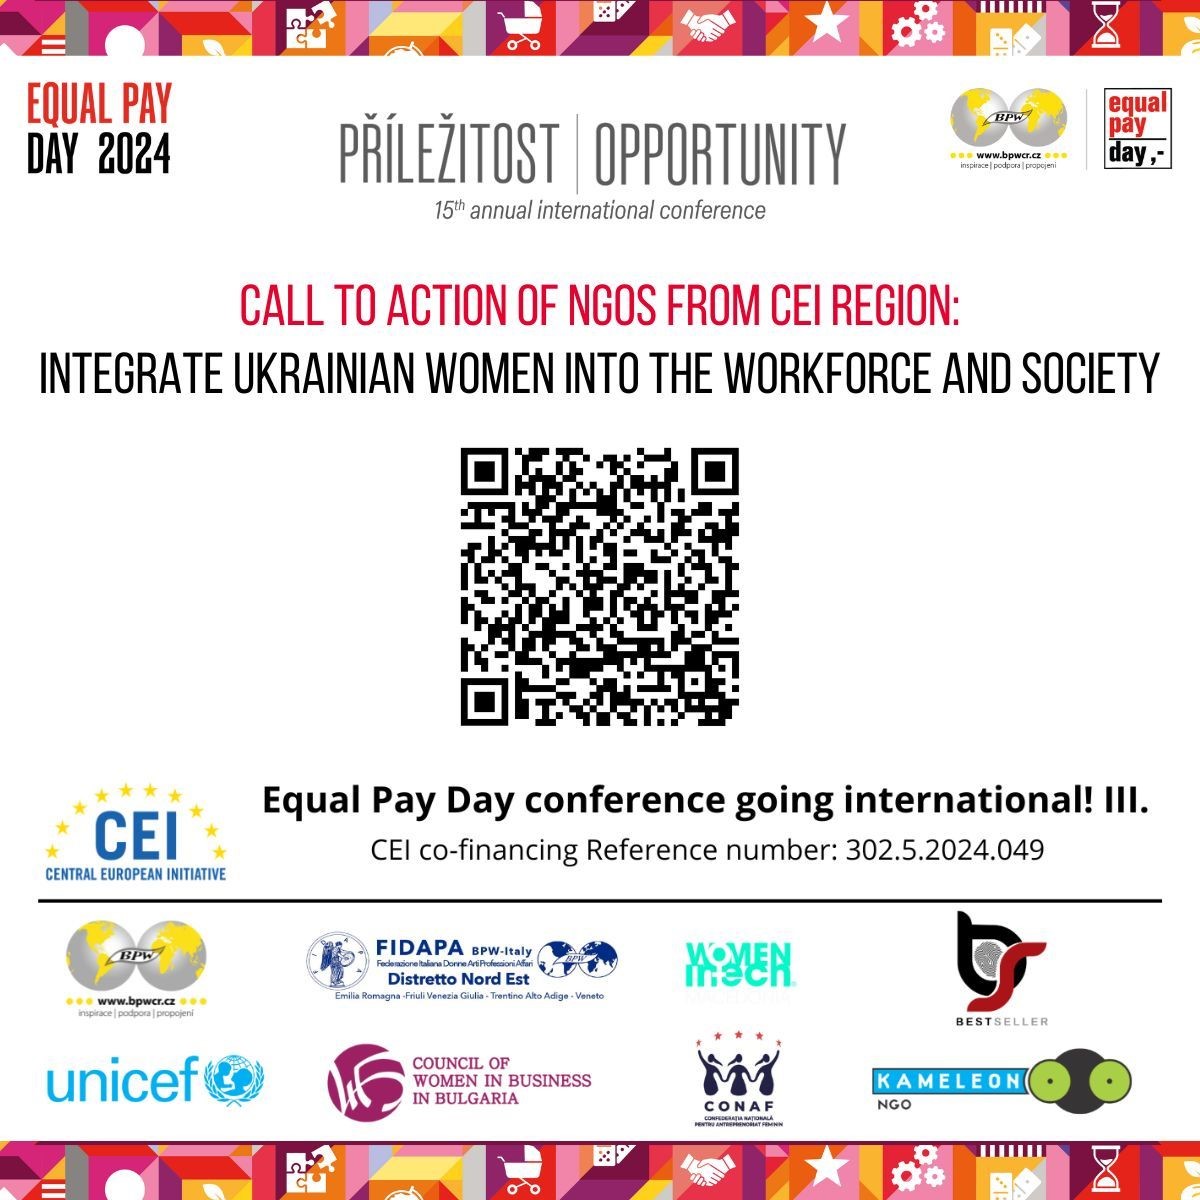 Professional women from 🇧🇦🇧🇬🇮🇹🇲🇰🇷🇴 🇷🇸🇺🇦attended #EPD2024 in Prague 🇨🇿 & issued a #CALLTOACTION to raise awareness of effects of war & advocate for solutions, contributing to paving way for + inclusive future for women in 🇺🇦#CEICooperationFund ℹ️ tinyurl.com/dzsb7dam